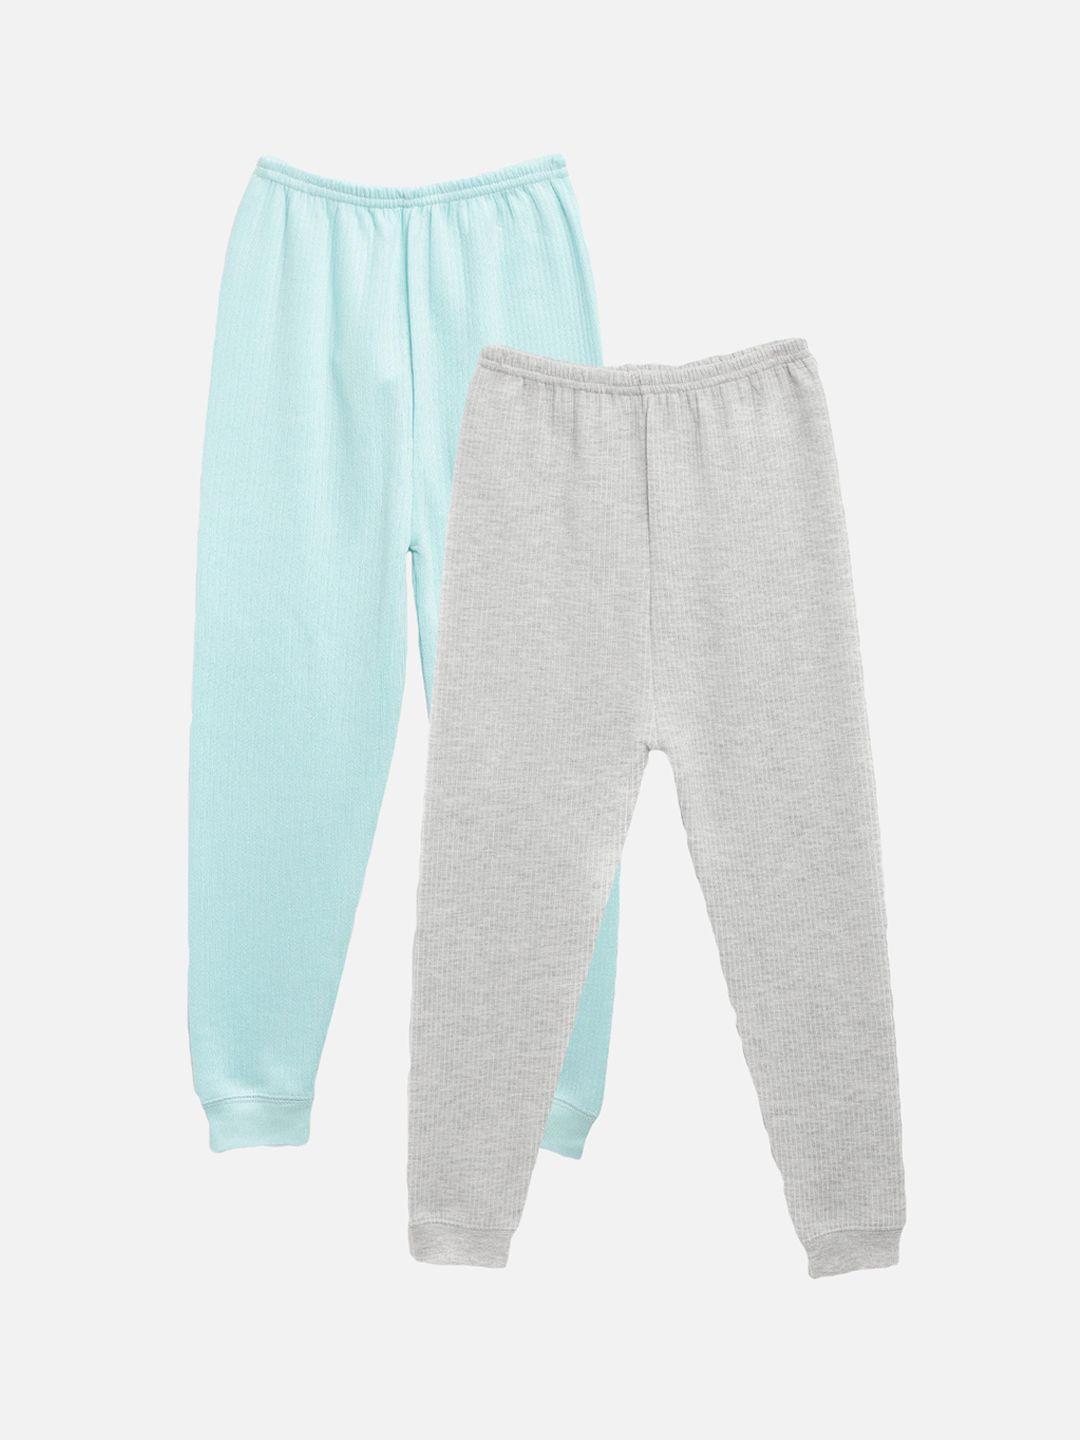 kanvin boys pack of 2 turquoise blue & grey solid thermal bottoms